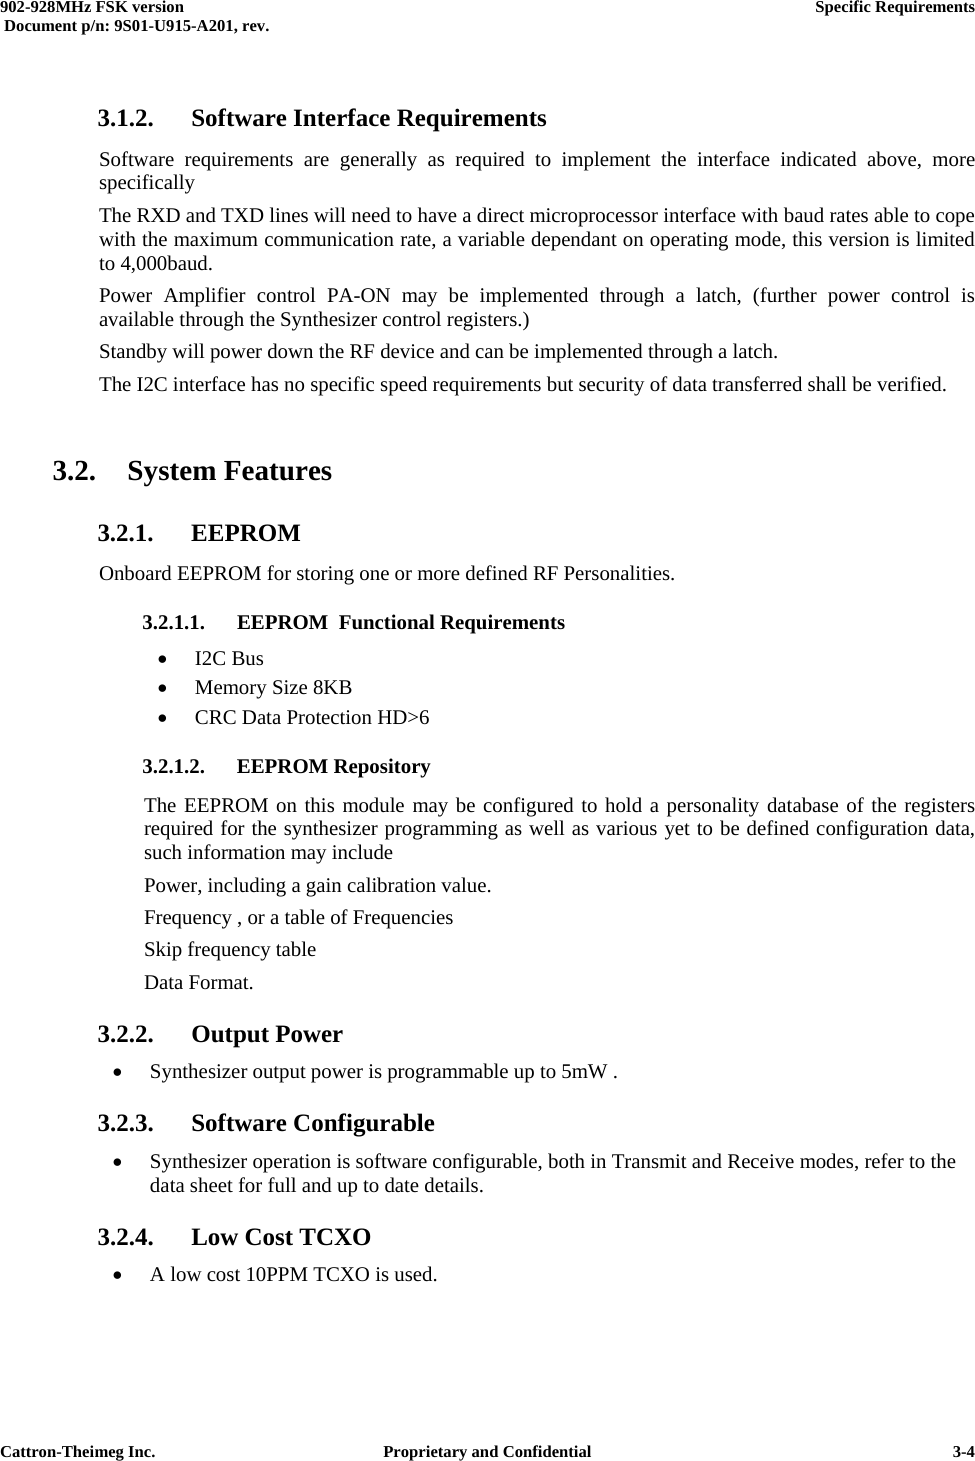  902-928MHz FSK version      Specific Requirements   Document p/n: 9S01-U915-A201, rev.   Cattron-Theimeg Inc.  Proprietary and Confidential   3-4 3.1.2.  Software Interface Requirements Software requirements are generally as required to implement the interface indicated above, more specifically The RXD and TXD lines will need to have a direct microprocessor interface with baud rates able to cope with the maximum communication rate, a variable dependant on operating mode, this version is limited to 4,000baud.  Power Amplifier control PA-ON may be implemented through a latch, (further power control is available through the Synthesizer control registers.) Standby will power down the RF device and can be implemented through a latch. The I2C interface has no specific speed requirements but security of data transferred shall be verified.  3.2. System Features 3.2.1. EEPROM Onboard EEPROM for storing one or more defined RF Personalities. 3.2.1.1. EEPROM  Functional Requirements •  I2C Bus •  Memory Size 8KB •  CRC Data Protection HD&gt;6 3.2.1.2. EEPROM Repository The EEPROM on this module may be configured to hold a personality database of the registers required for the synthesizer programming as well as various yet to be defined configuration data, such information may include Power, including a gain calibration value. Frequency , or a table of Frequencies Skip frequency table  Data Format. 3.2.2. Output Power •  Synthesizer output power is programmable up to 5mW .  3.2.3. Software Configurable •  Synthesizer operation is software configurable, both in Transmit and Receive modes, refer to the  data sheet for full and up to date details. 3.2.4.  Low Cost TCXO •  A low cost 10PPM TCXO is used.  